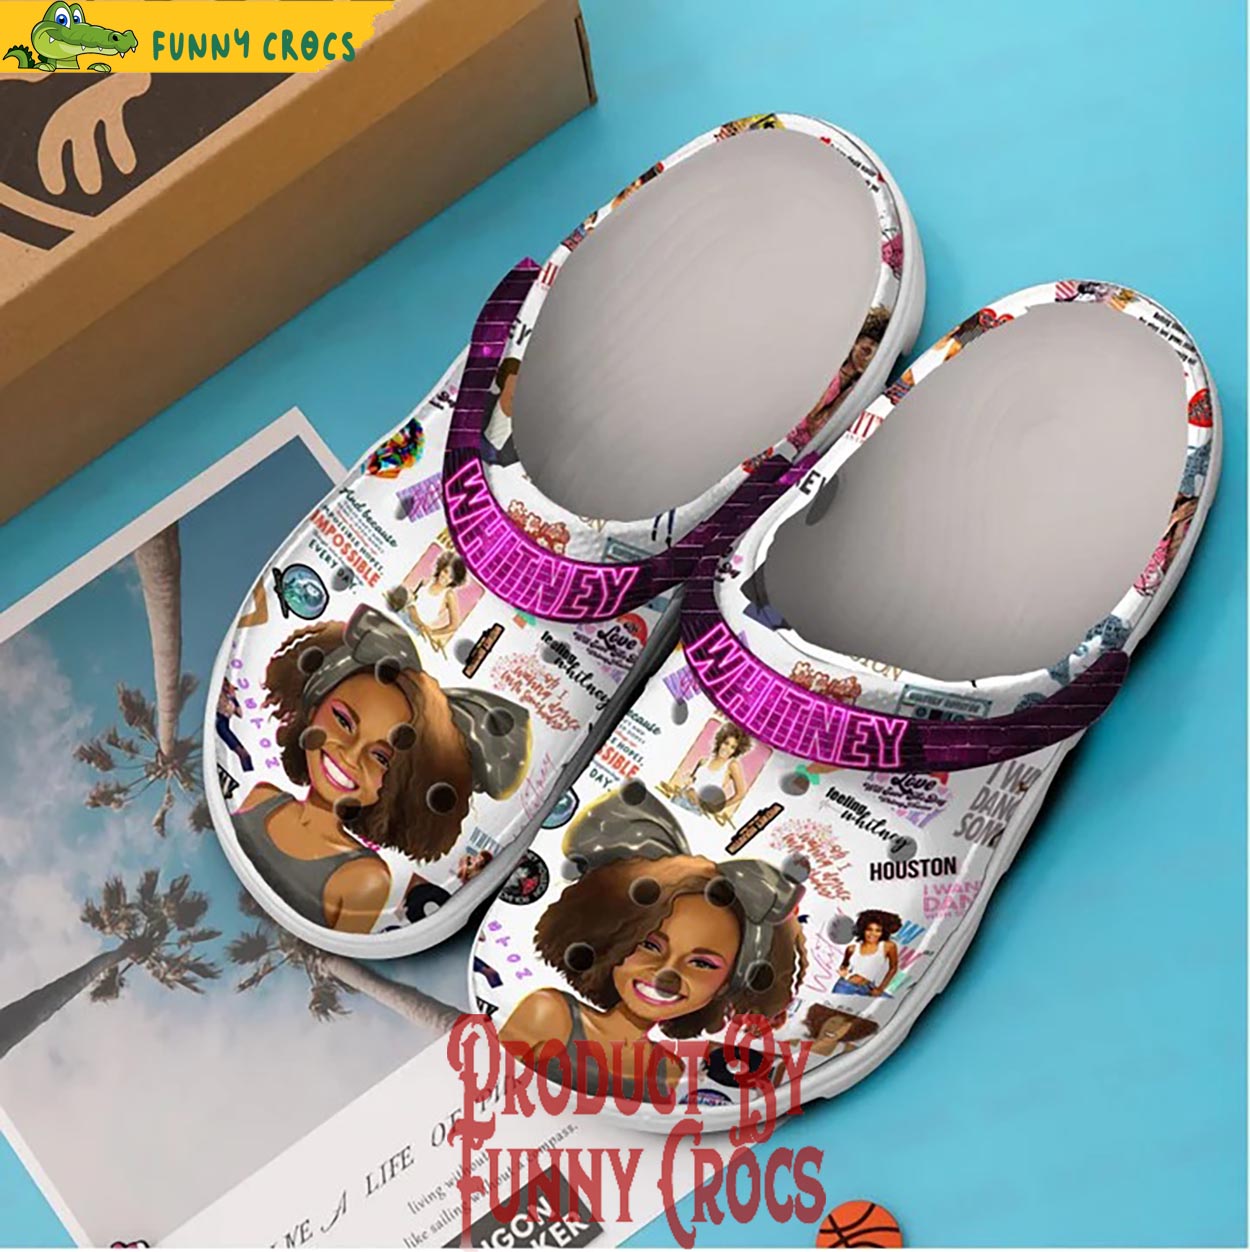 Whitney Crocs Shoes - Discover Comfort And Style Clog Shoes With Funny ...